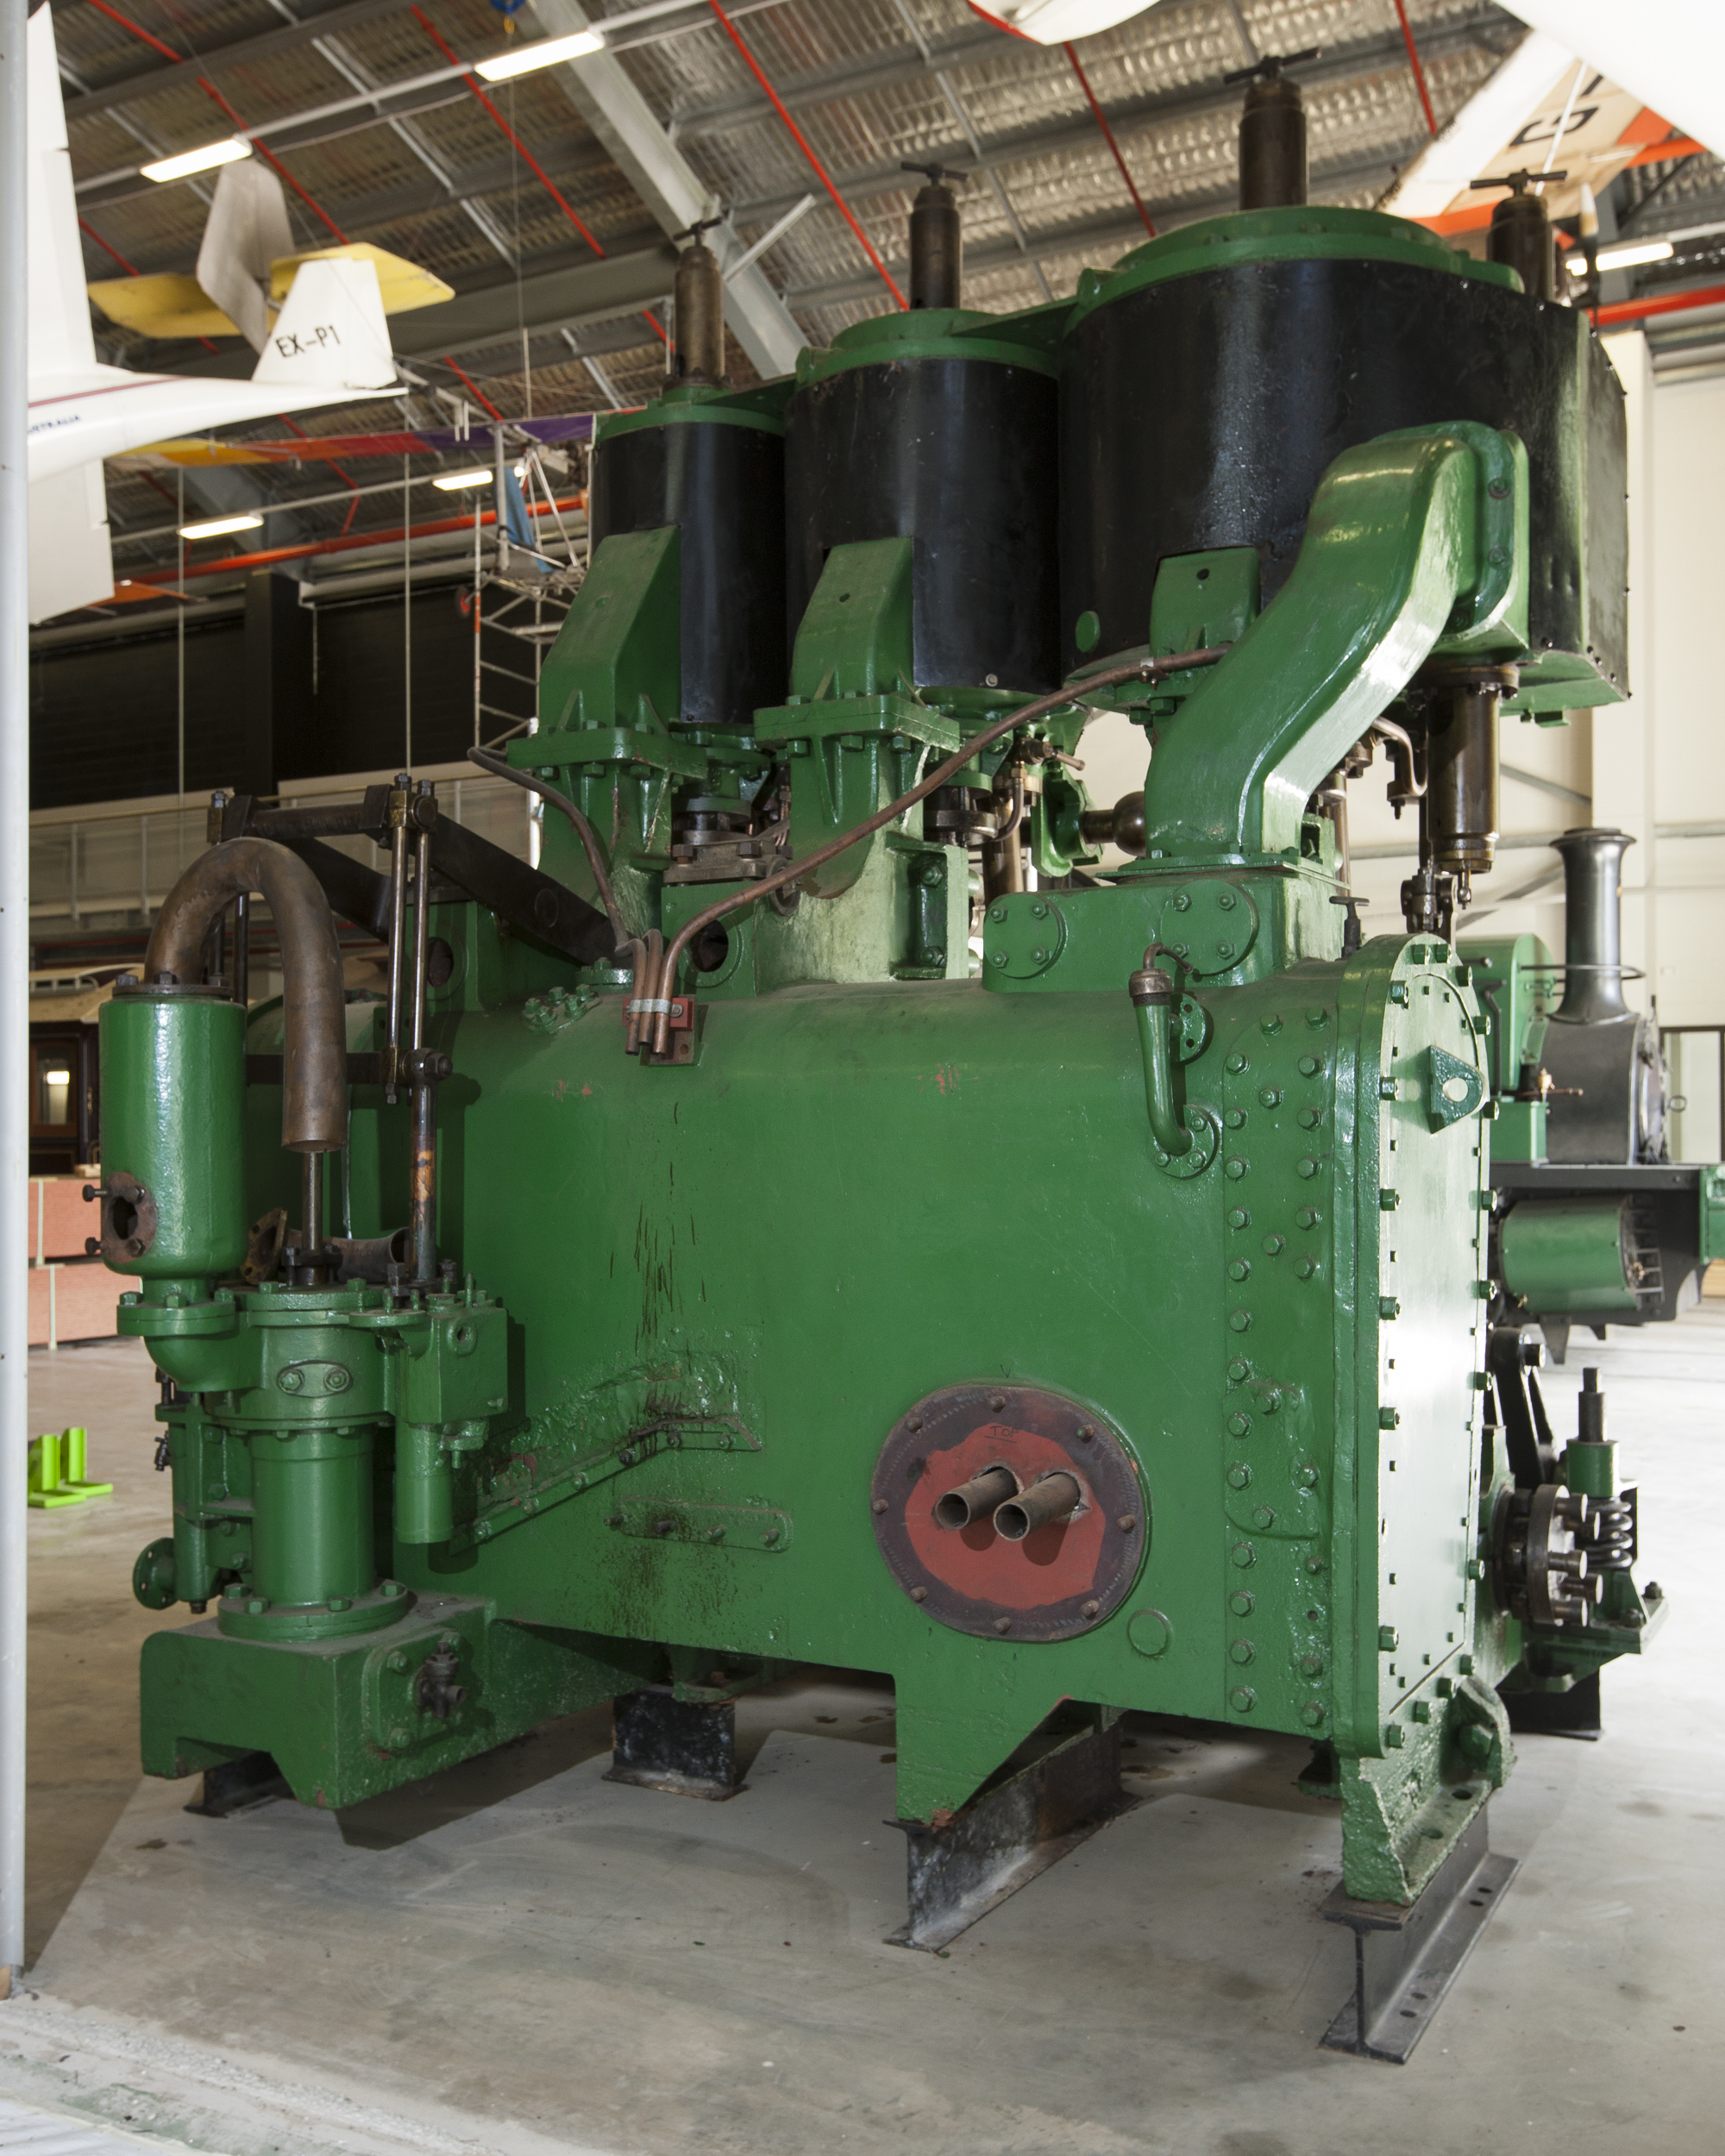 Steam engine by Forth Banks Works used to power Sydney ferries